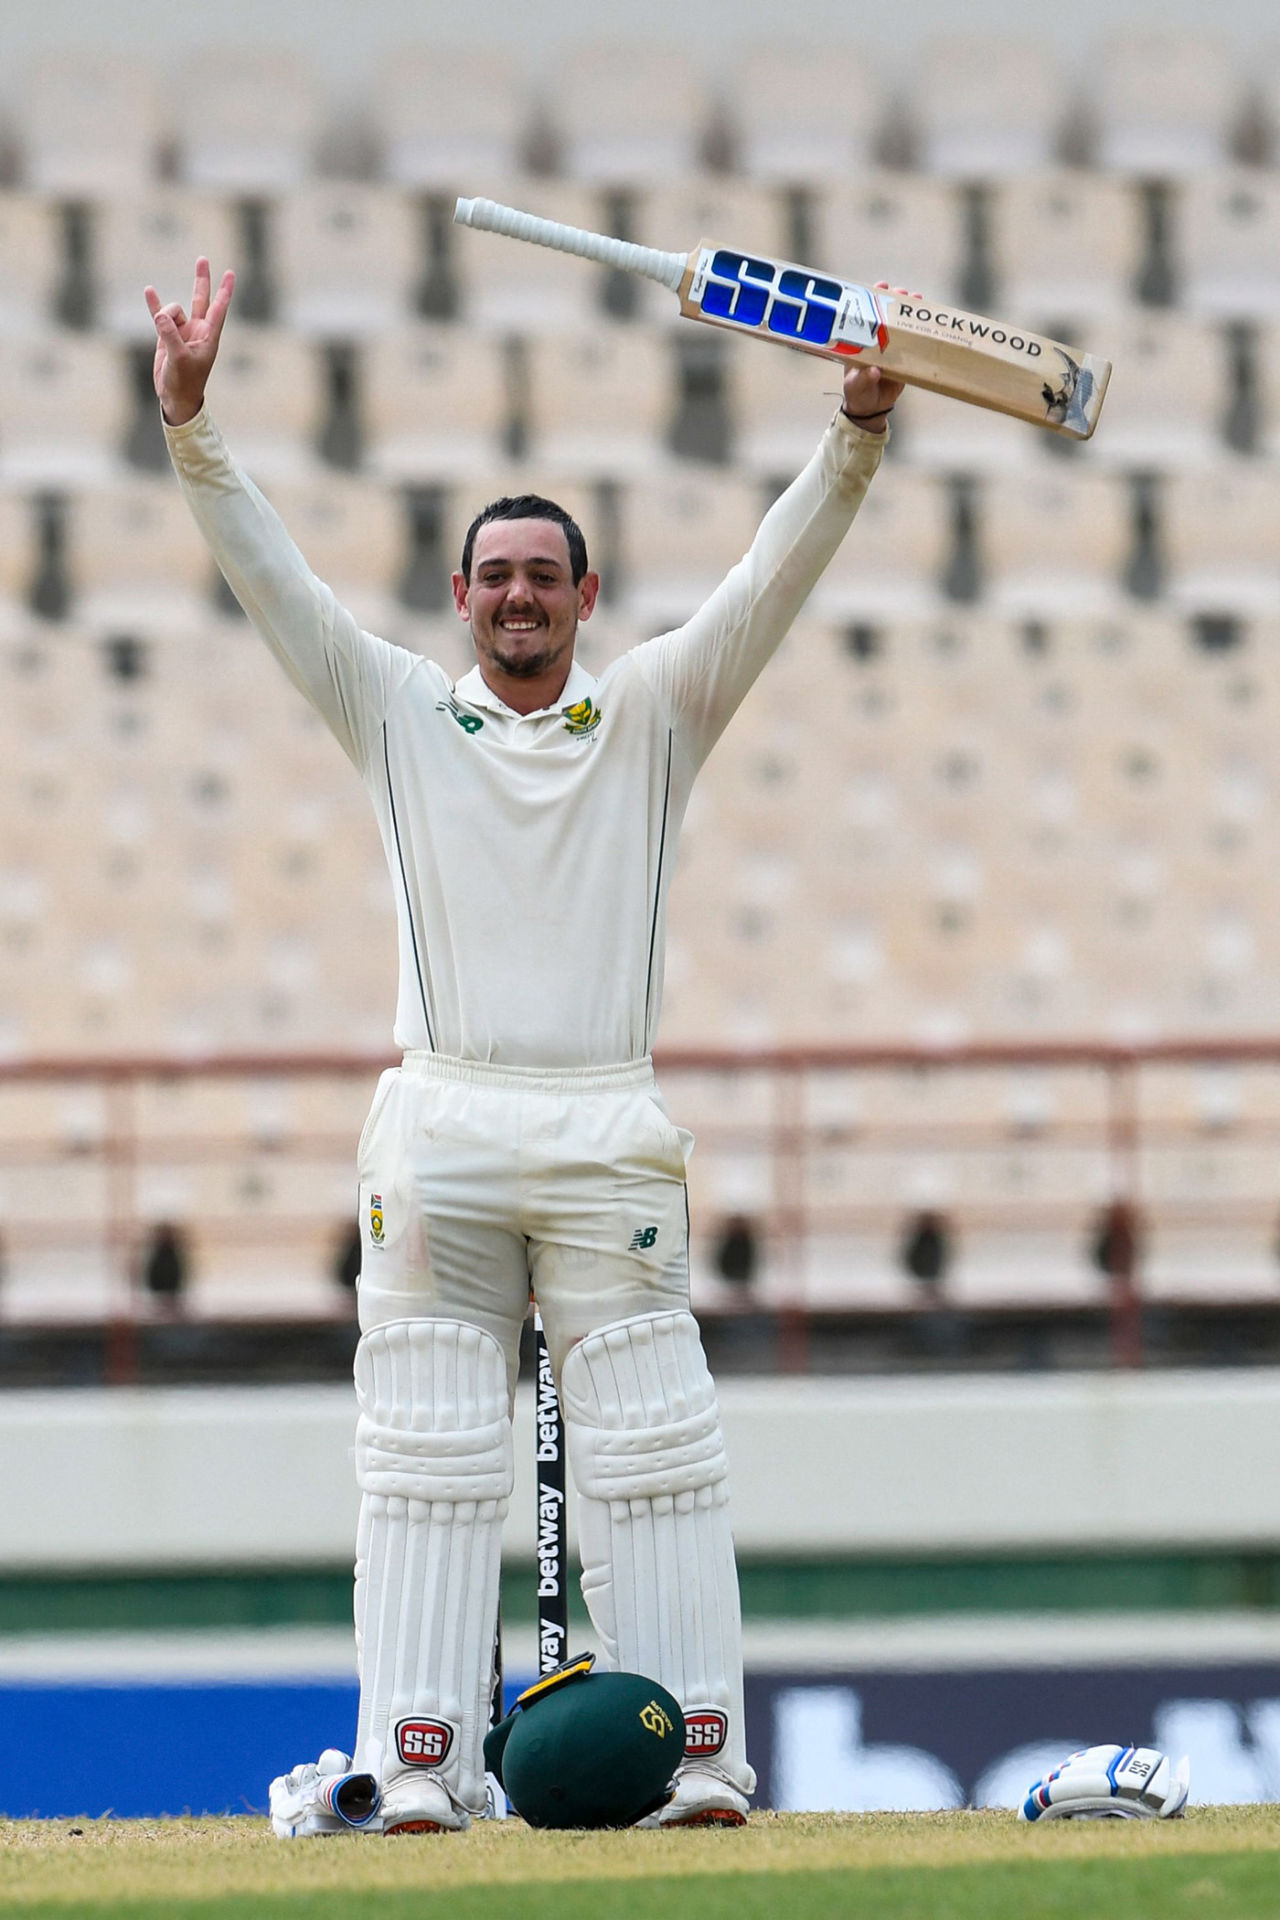 Quinton de Kock gestures to the dressing room on reaching his century, West Indies vs South Africa, 1st Test, St Lucia, 2nd day, June 11, 2021